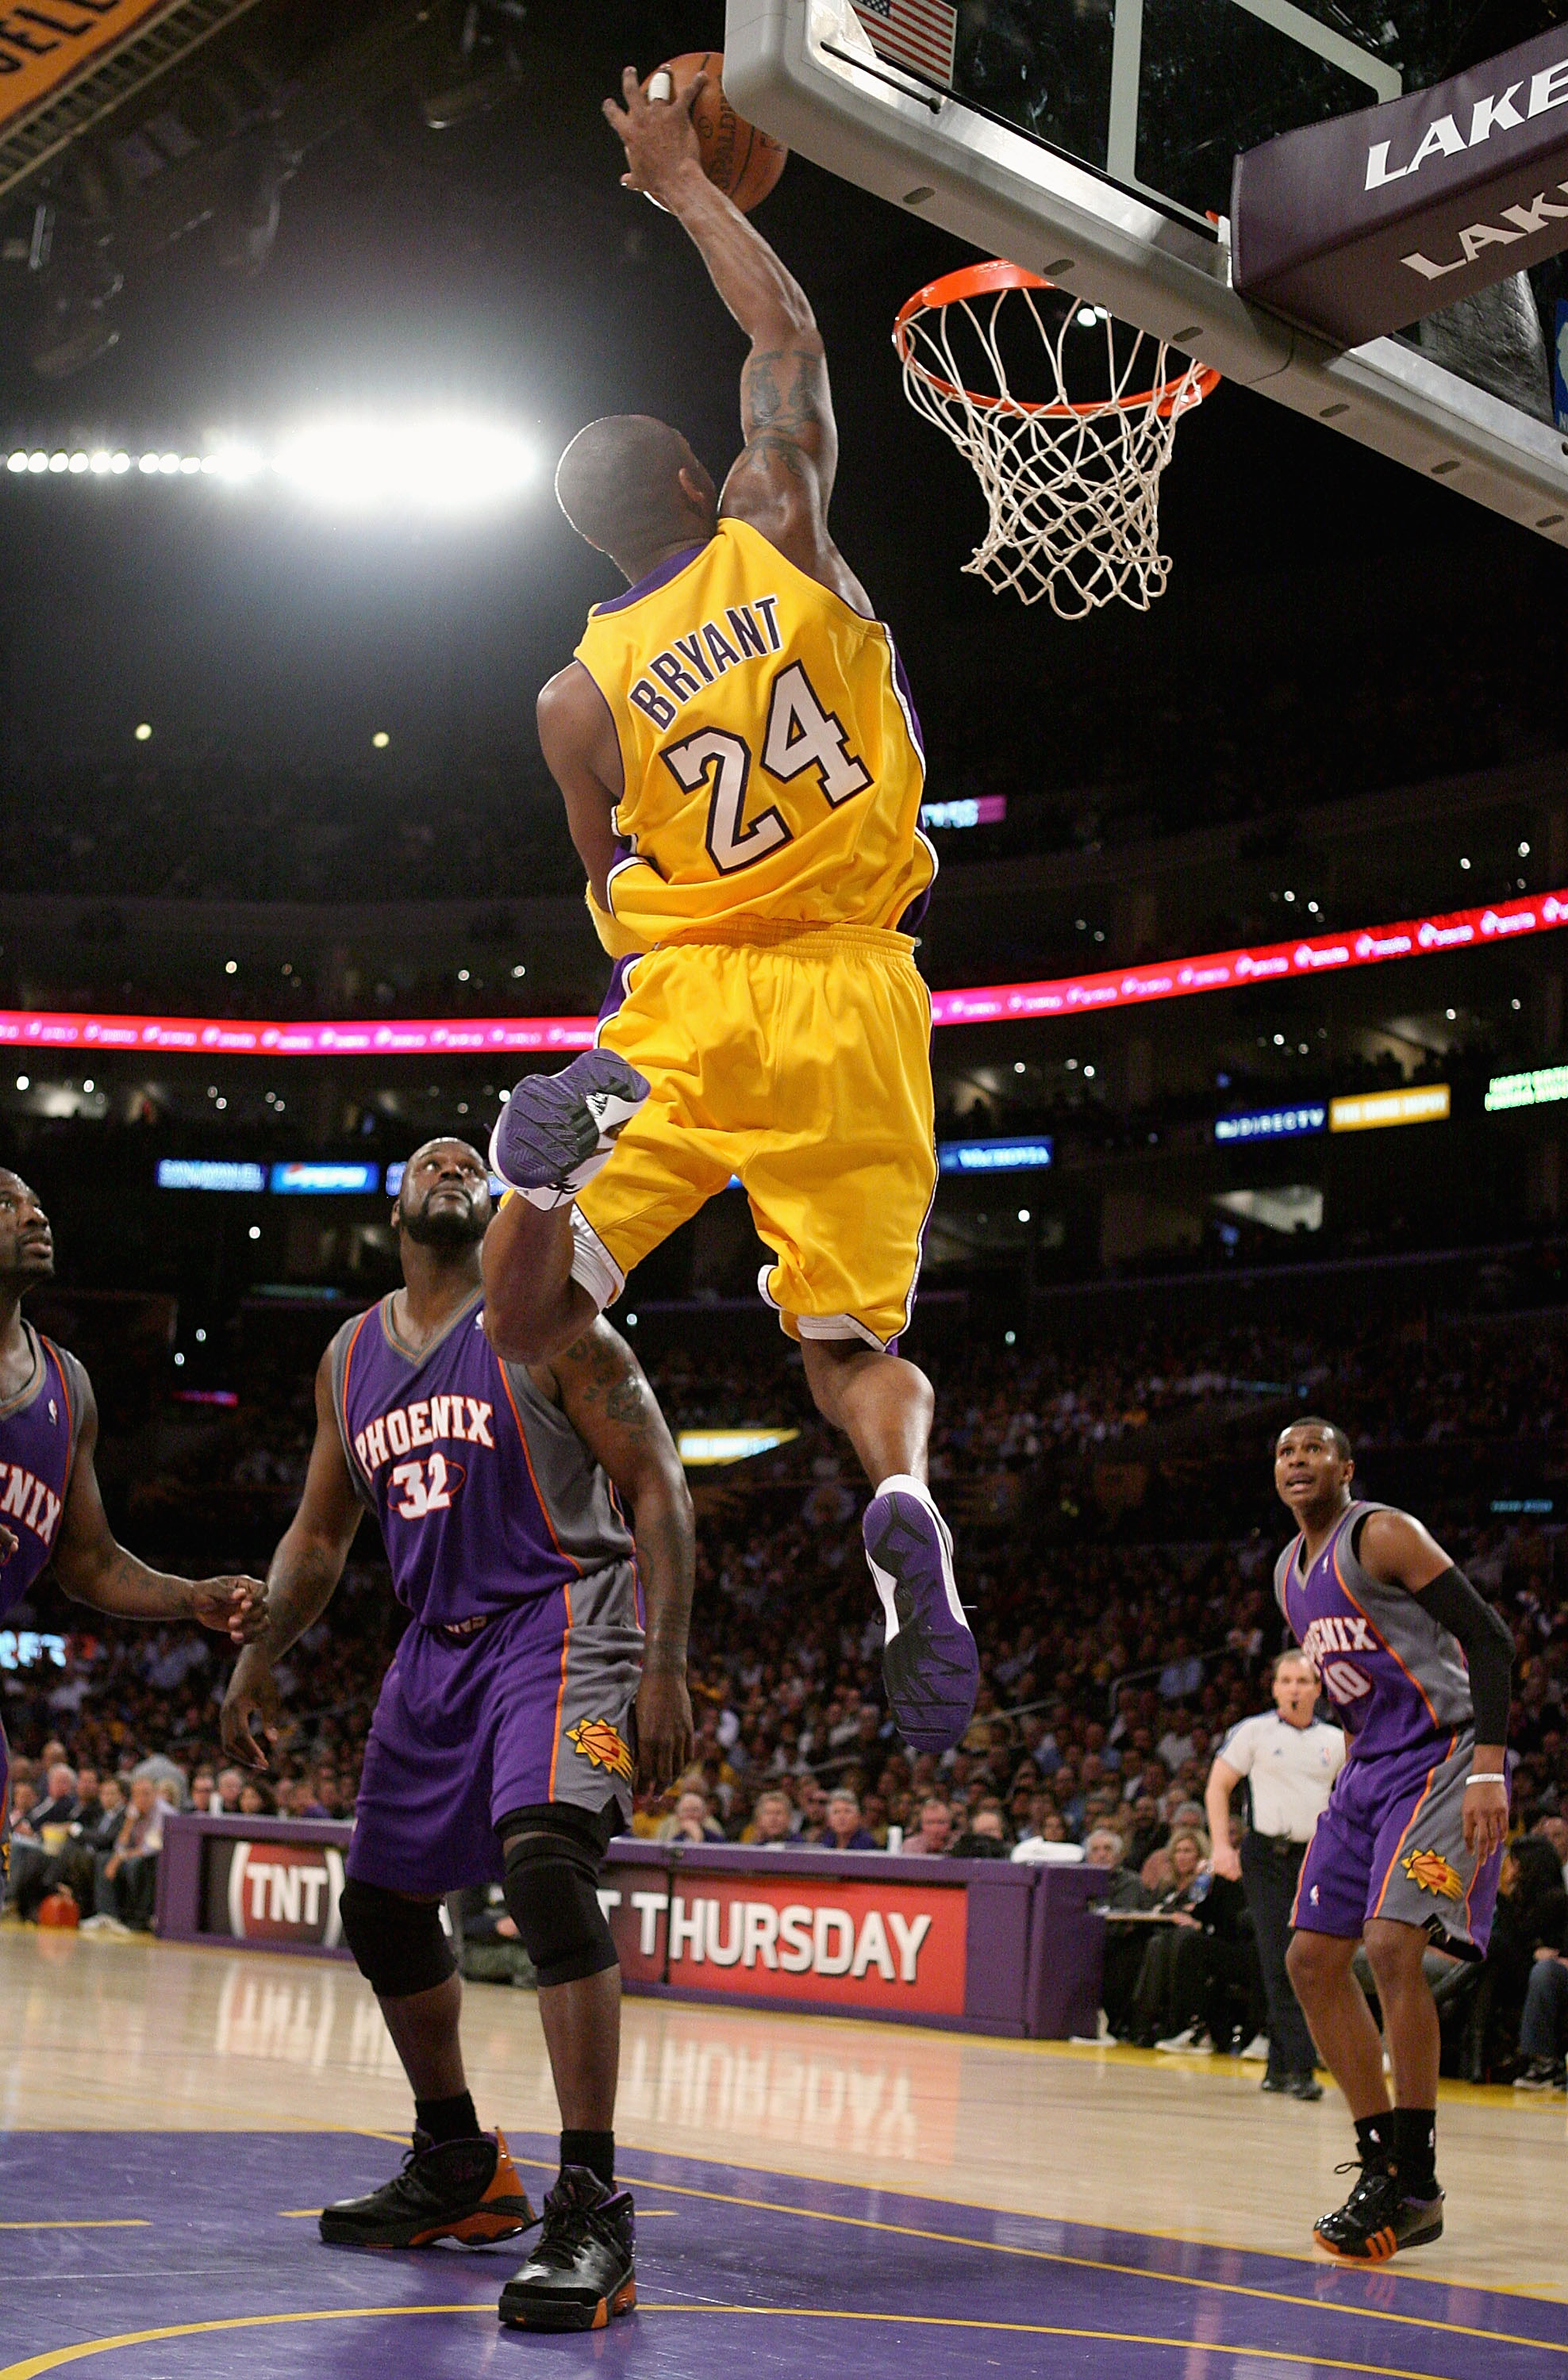 The Top 10 Statement Dunks For The 2010-2011 NBA Season | Bleacher Report | Latest ...